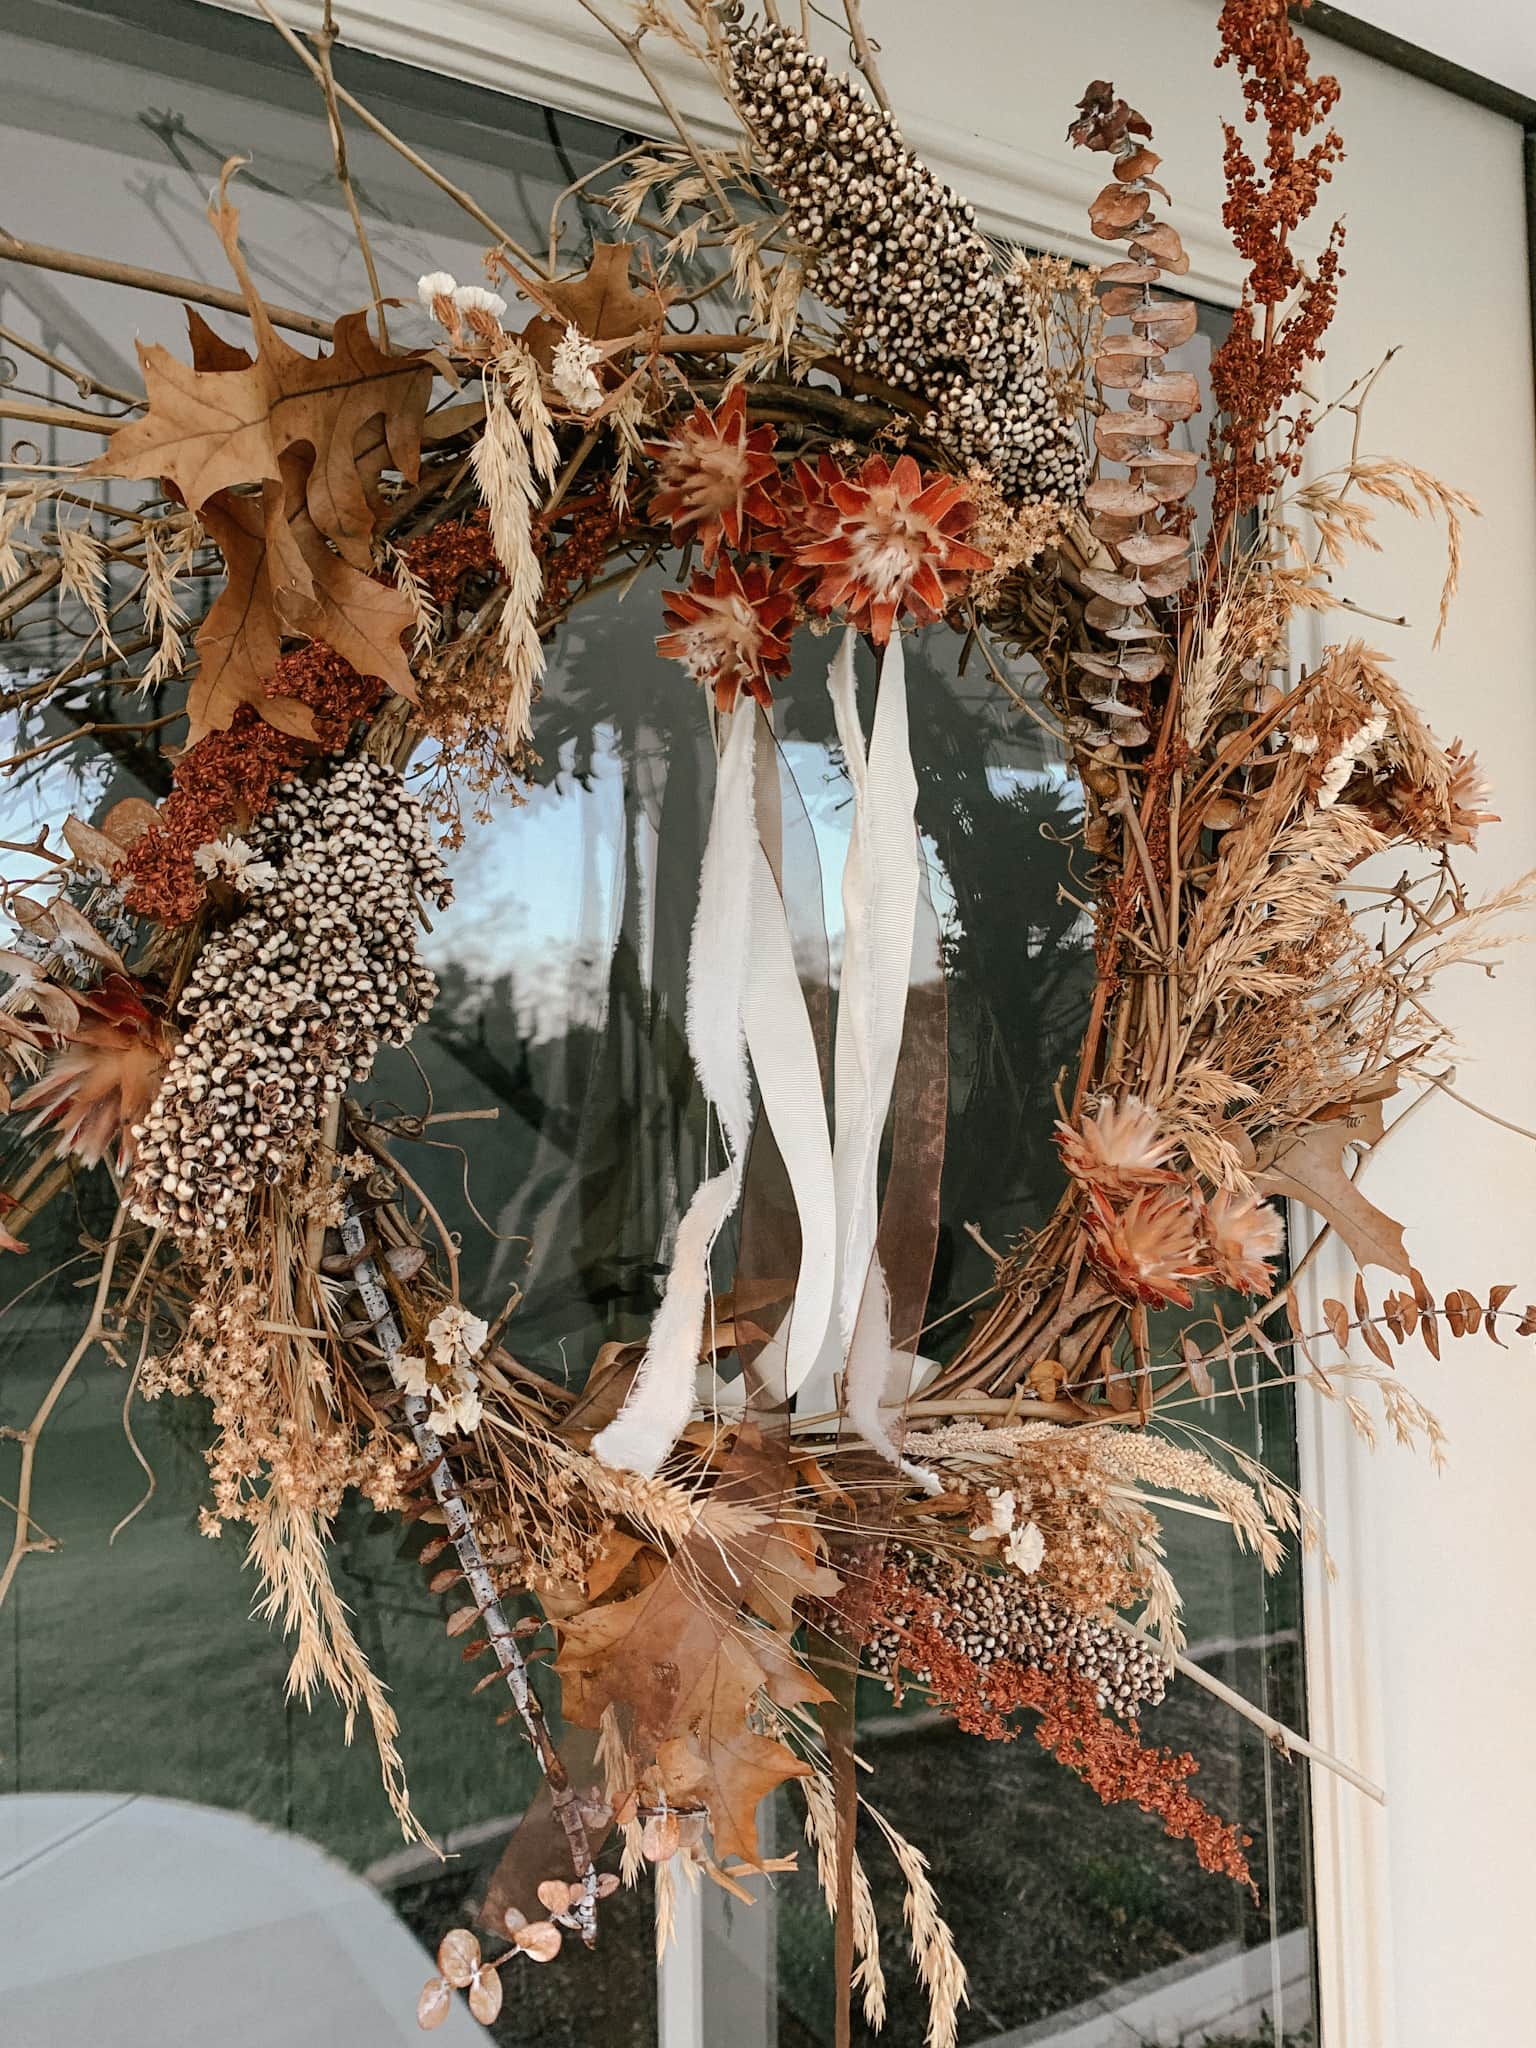 Fall Wreath Using Dried Flowers ad Grass